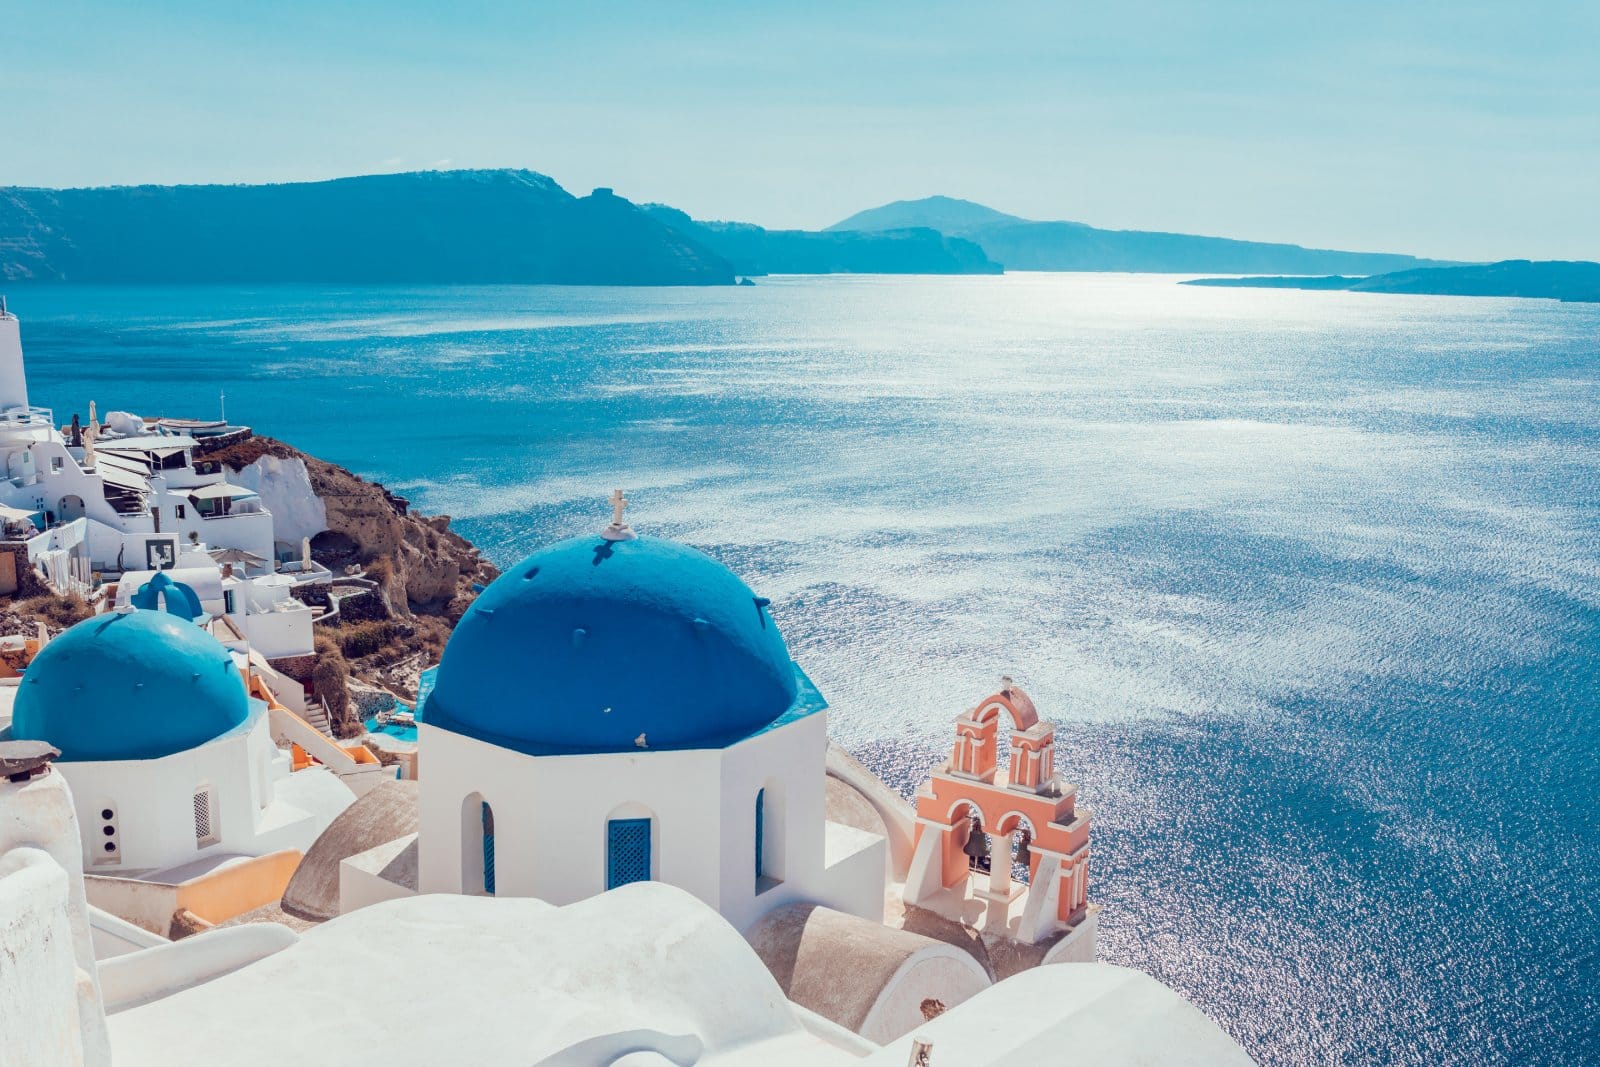 <p class="wp-caption-text">Image Credit: Shutterstock / Anastasios71</p>  <p>Indulge in the dramatic views of blue-domed churches and stunning sunsets that make Santorini a lover’s paradise.</p>